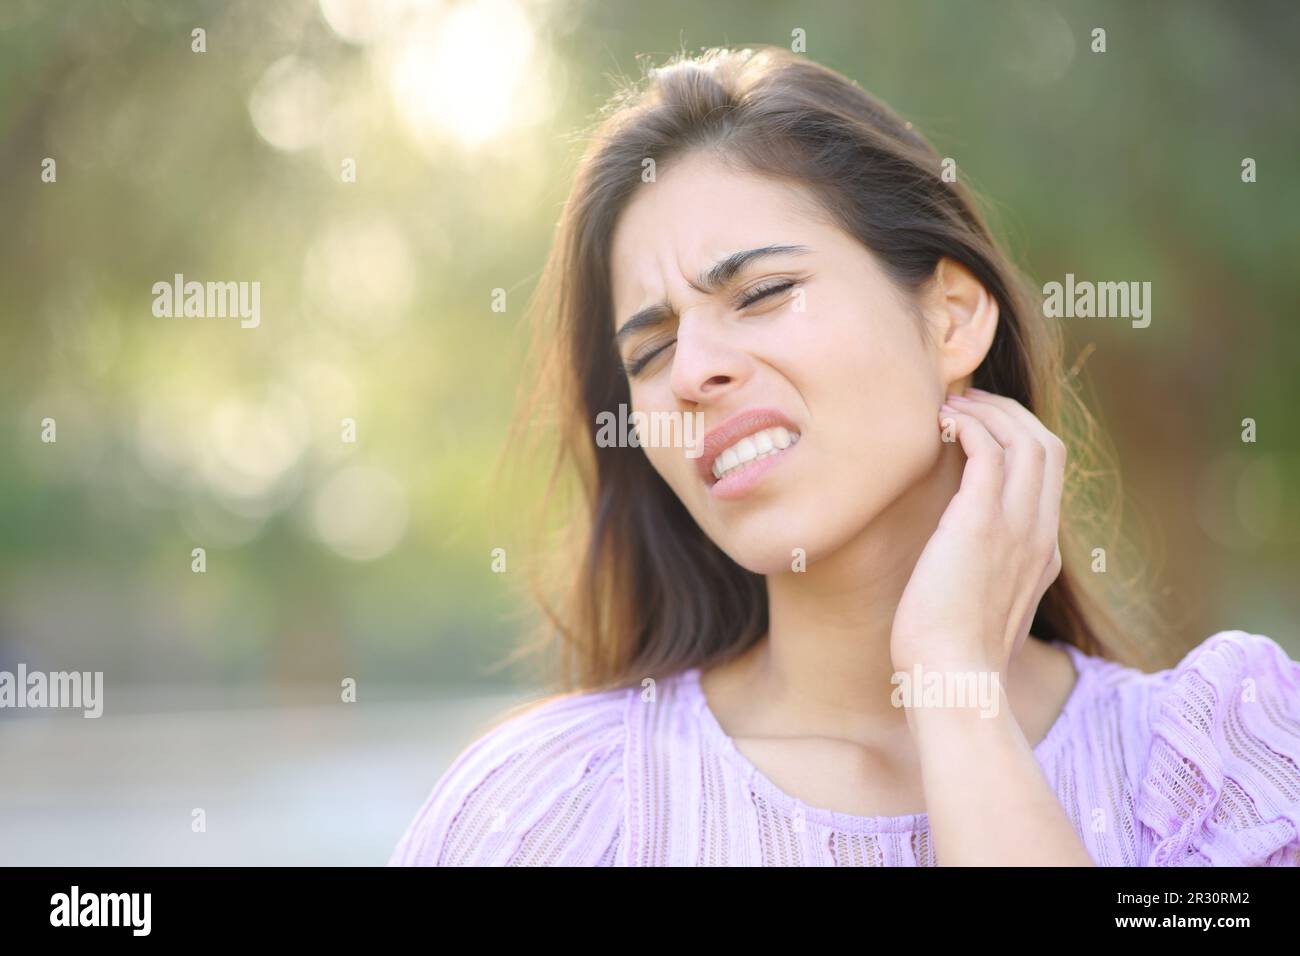 Stressed woman scratching neck after insect bite in a park Stock Photo